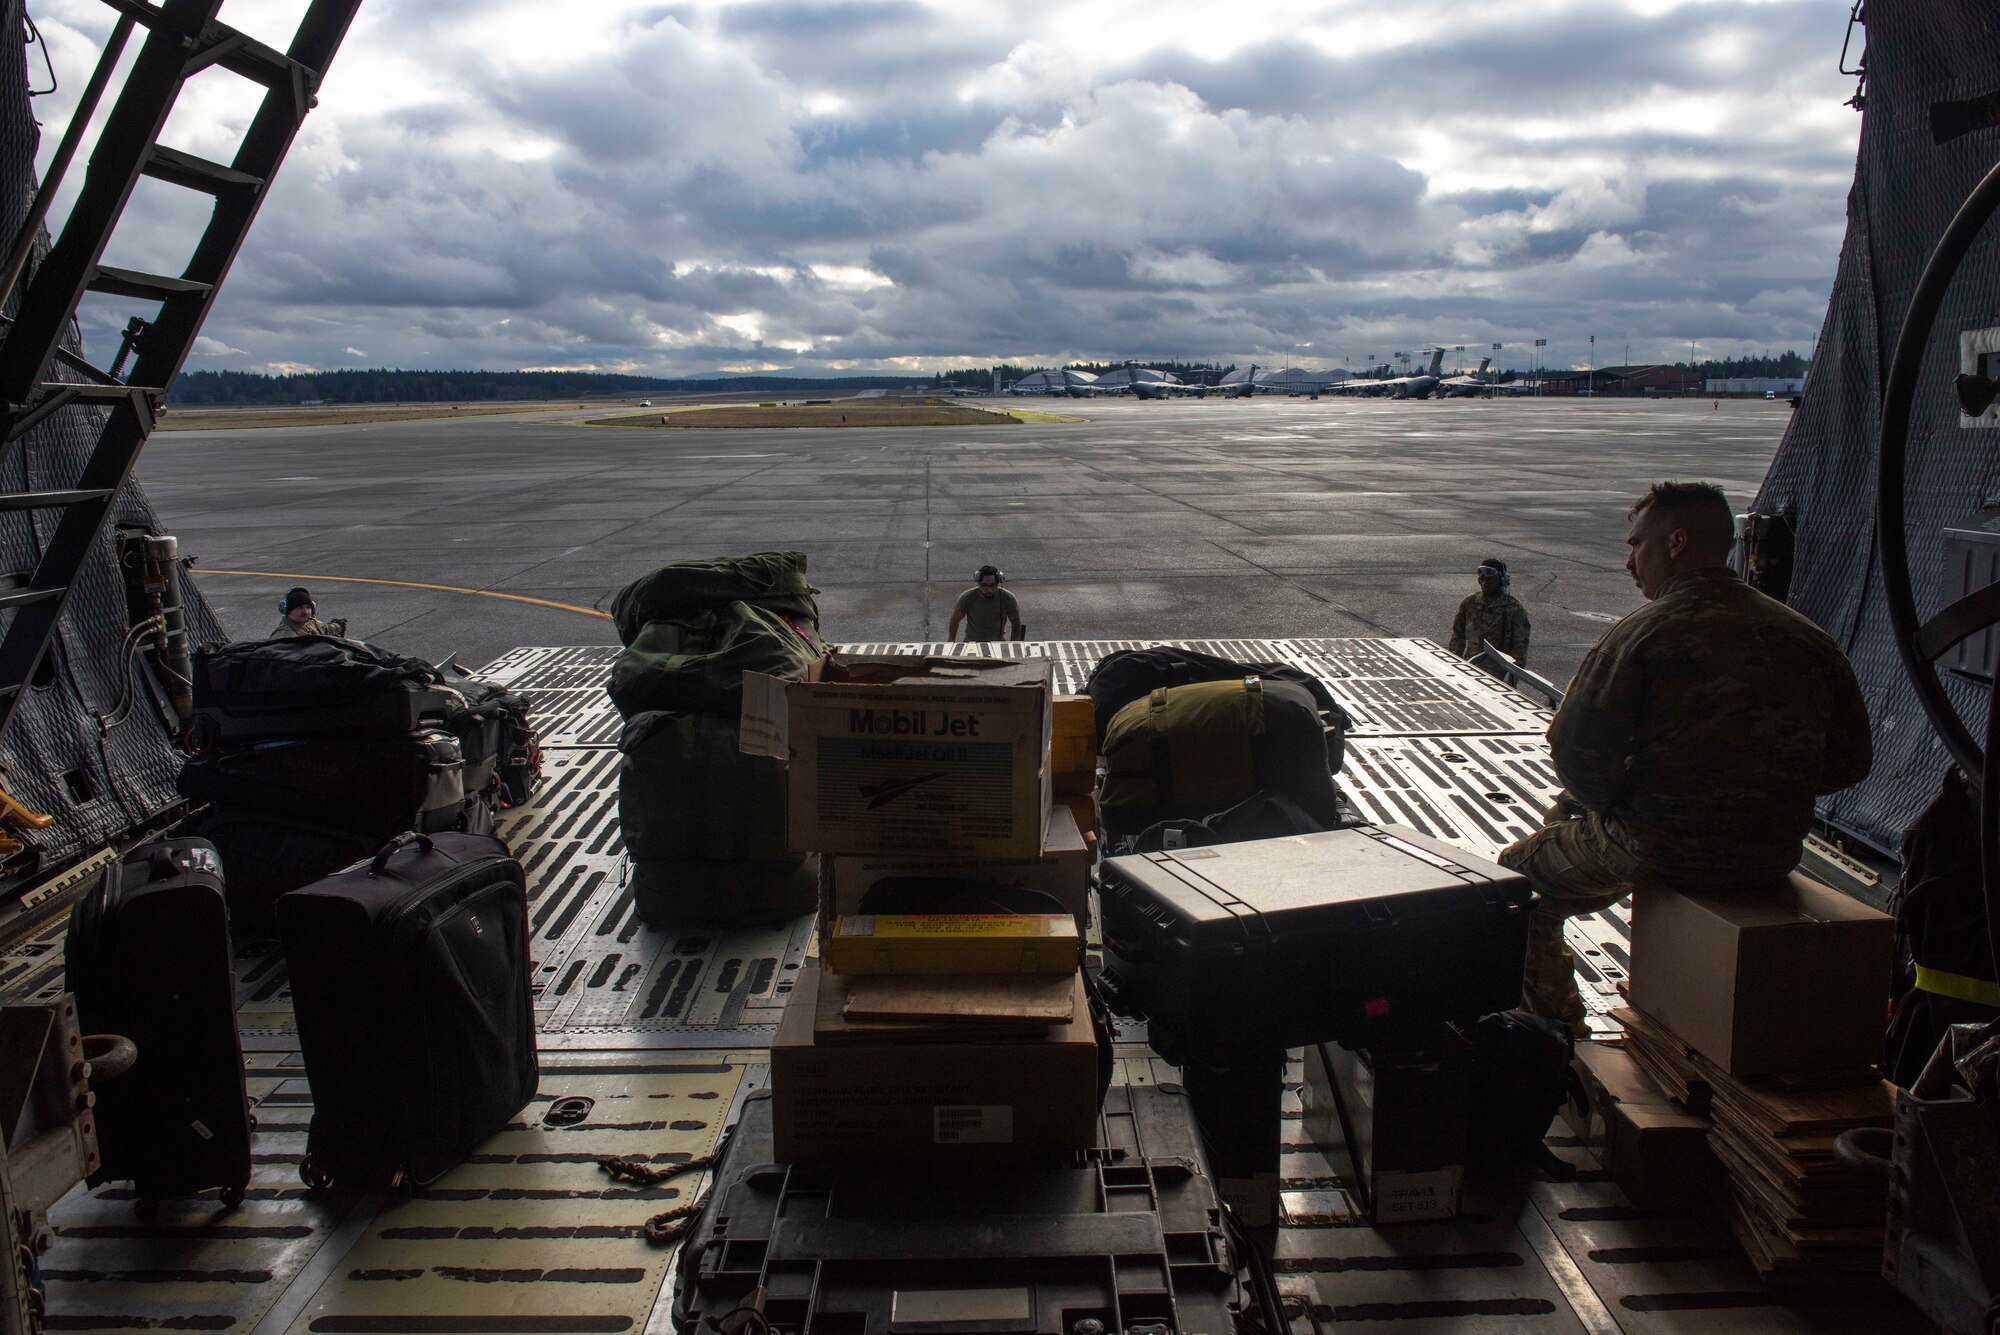 U.S. Air Force Airmen and Navy Sailors load cargo inside a C-5M Super Galaxy at Joint Base Lewis-McChord, Wash., Dec. 8, 2023. The joint operation consisted of loading cargo and mini submersibles on the aircraft and was conducted by service members from Travis Air Force Base, Calif., Joint Base Pearl Harbor-Hickam, Hawaii, and JBLM. (U.S. Air Force photo by Airman 1st Class Megan Geiger)